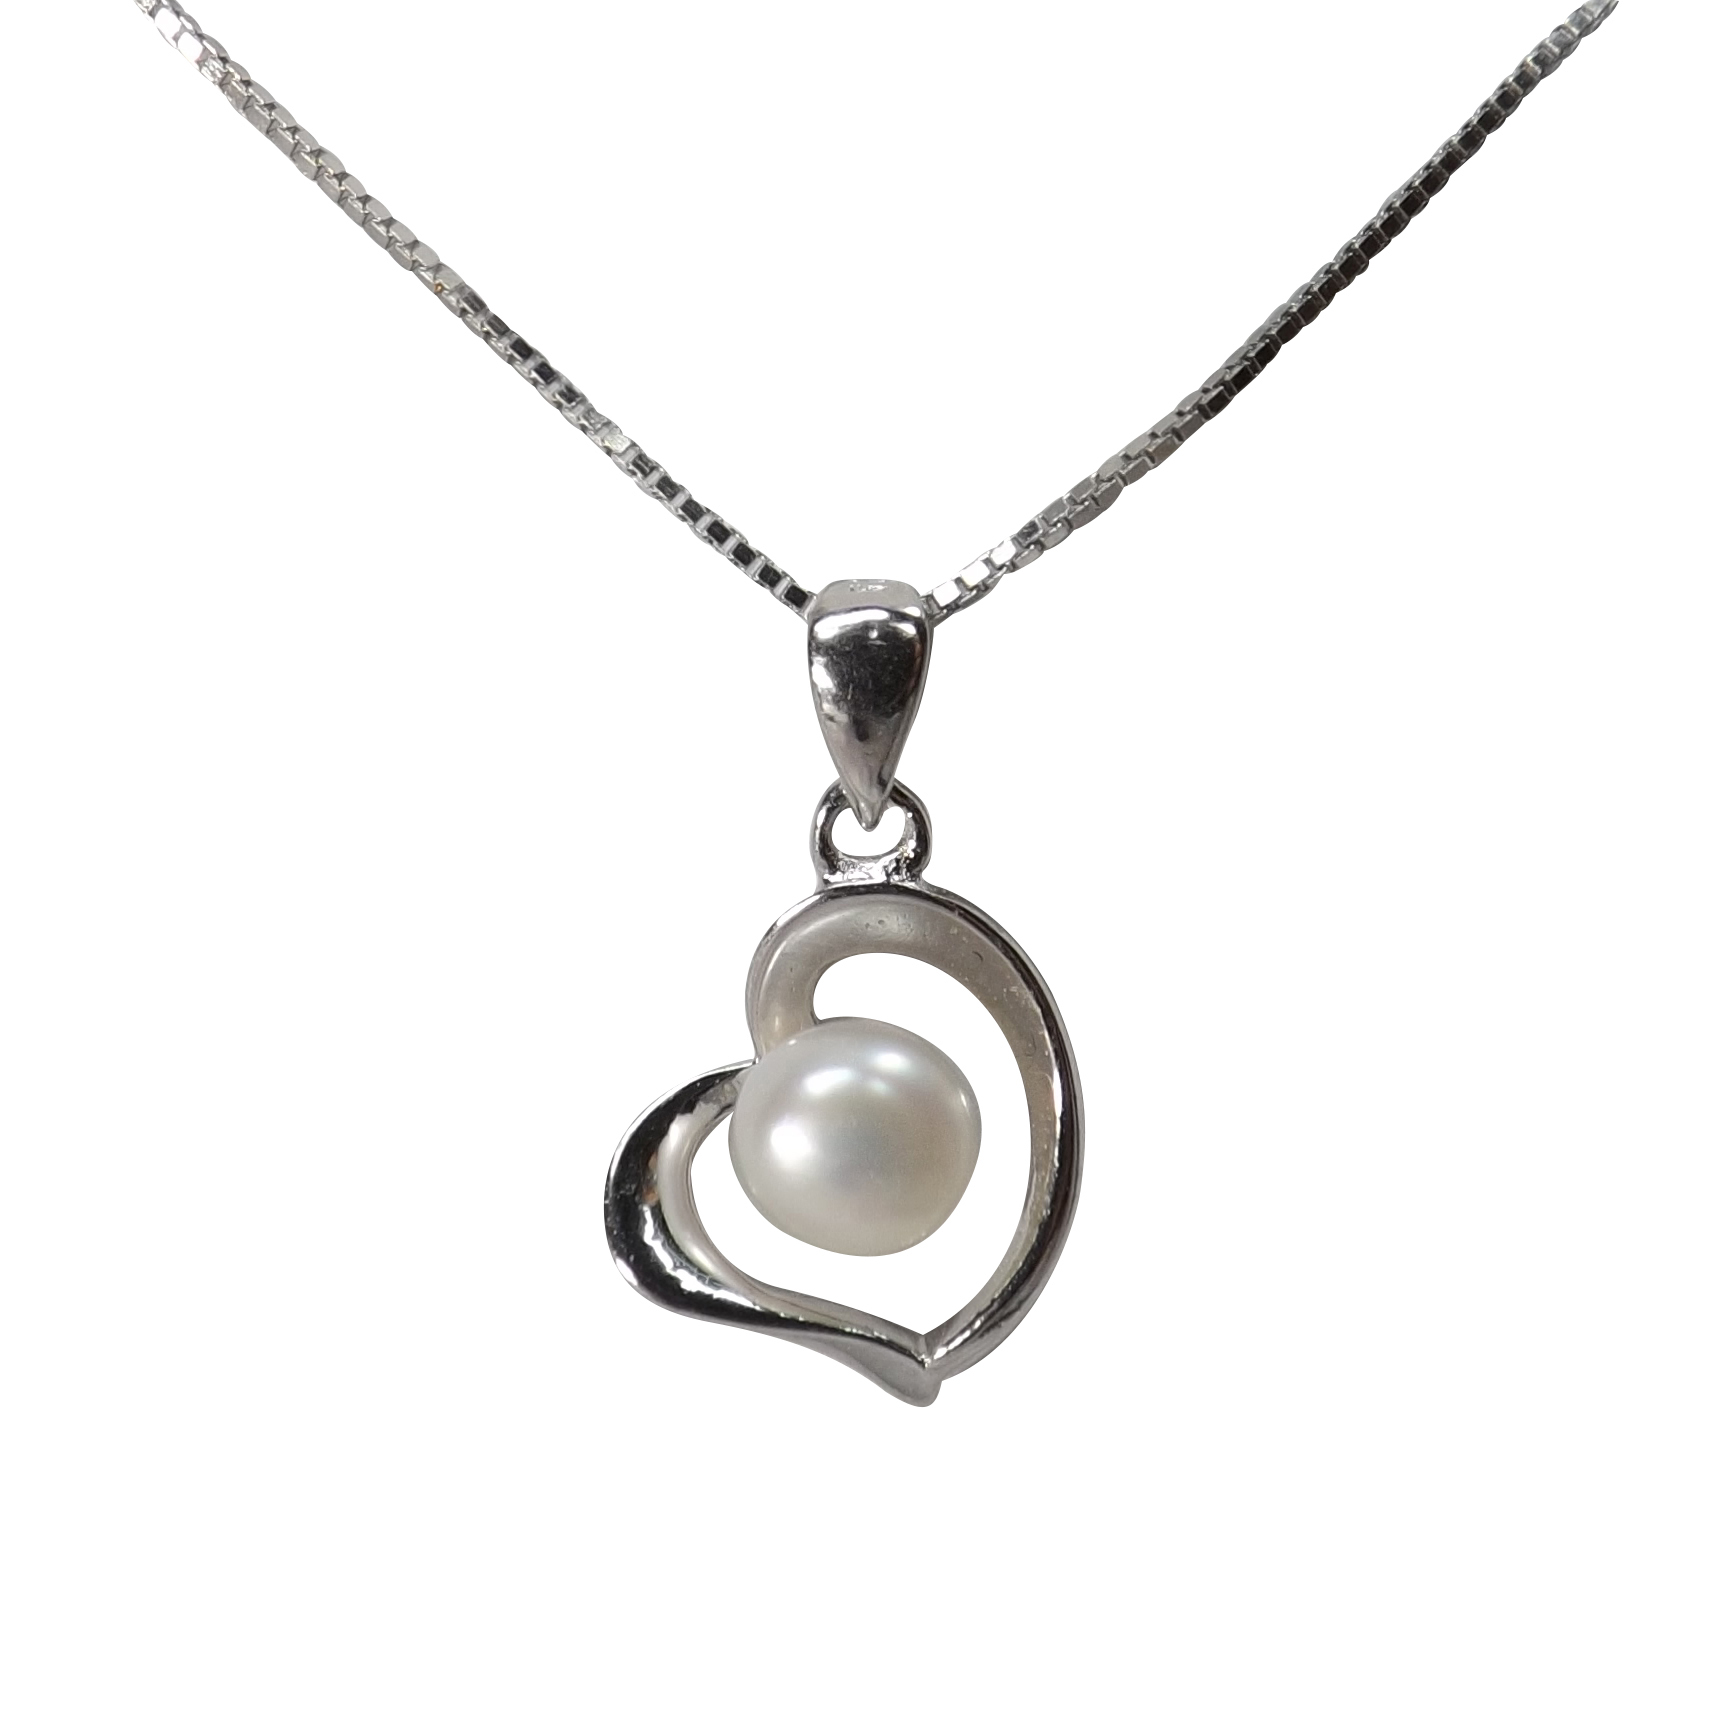 Modern 925 Sterling Silver Heart and Pearl Pendant Necklace